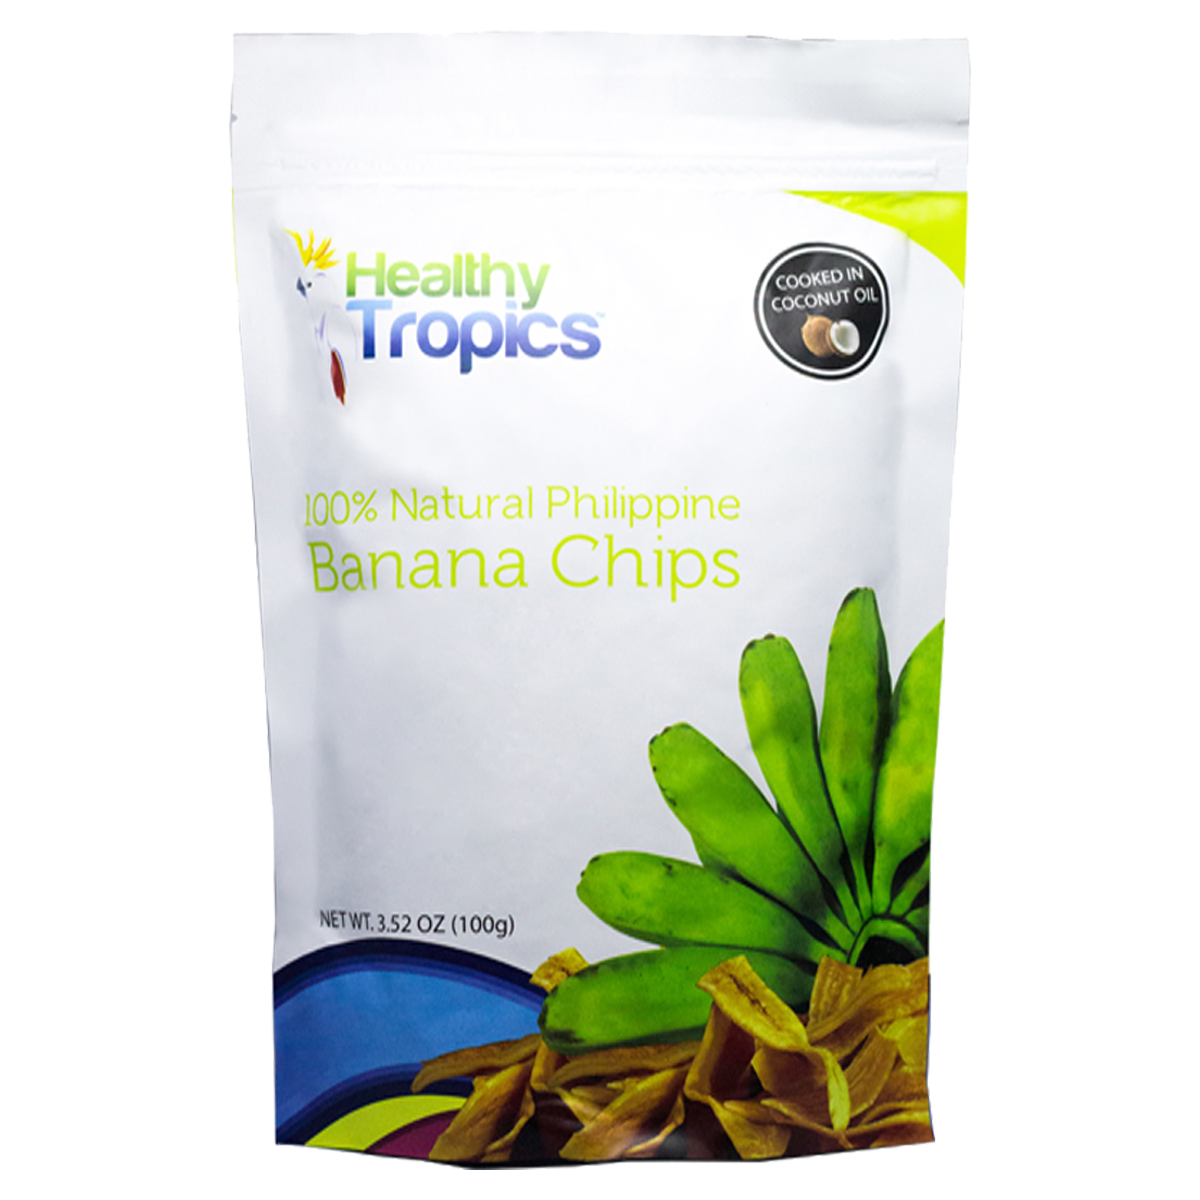 Healthy Tropics 100% Natural Philippine Banana Chips snack pack, 100g